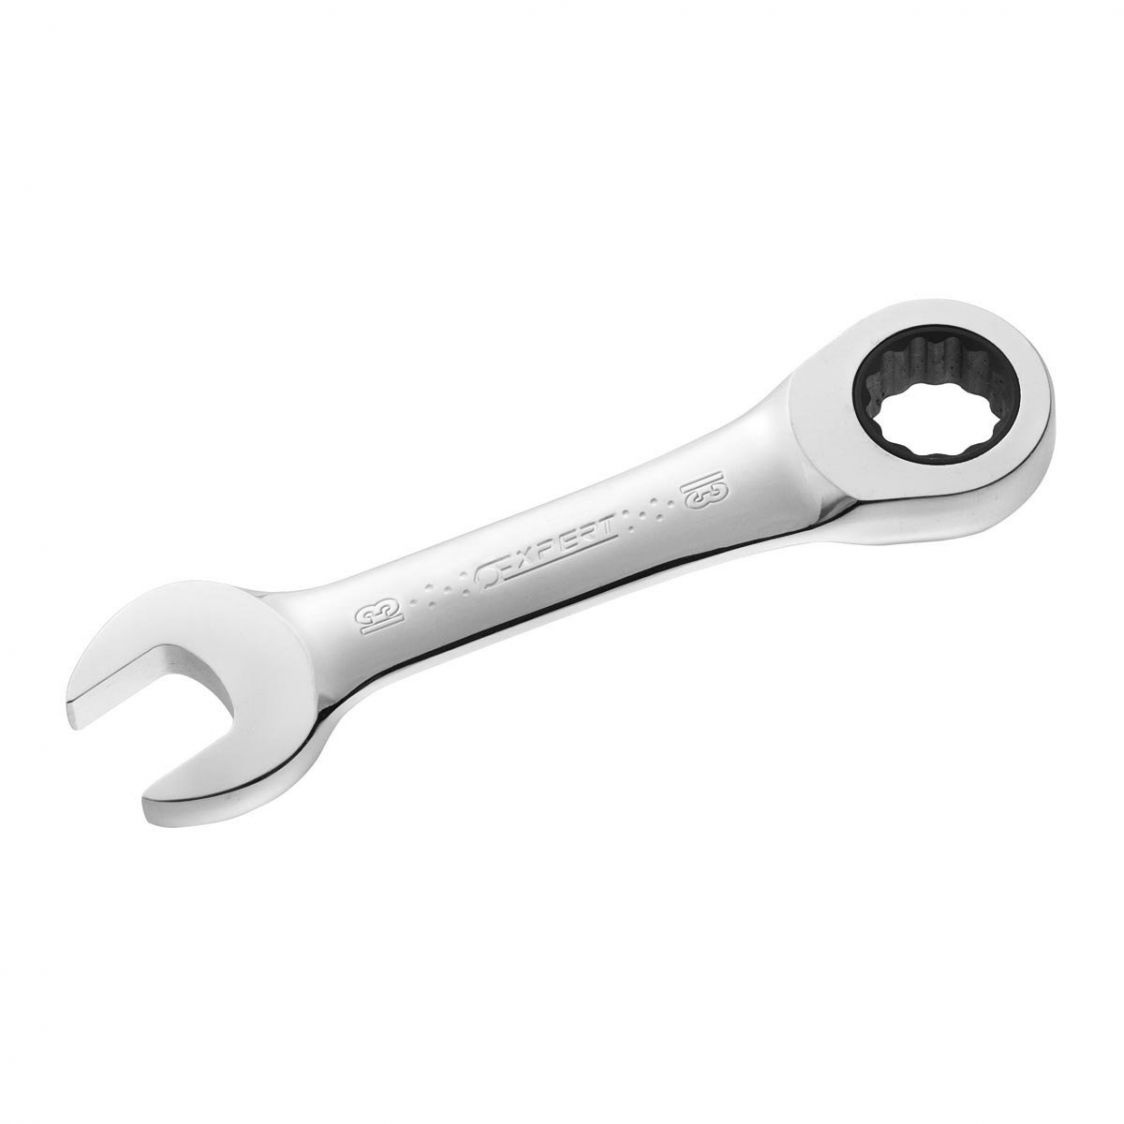 EXPERT by FACOM E110919 - 15mm Metric Stubby Ratchet Combination Spanner